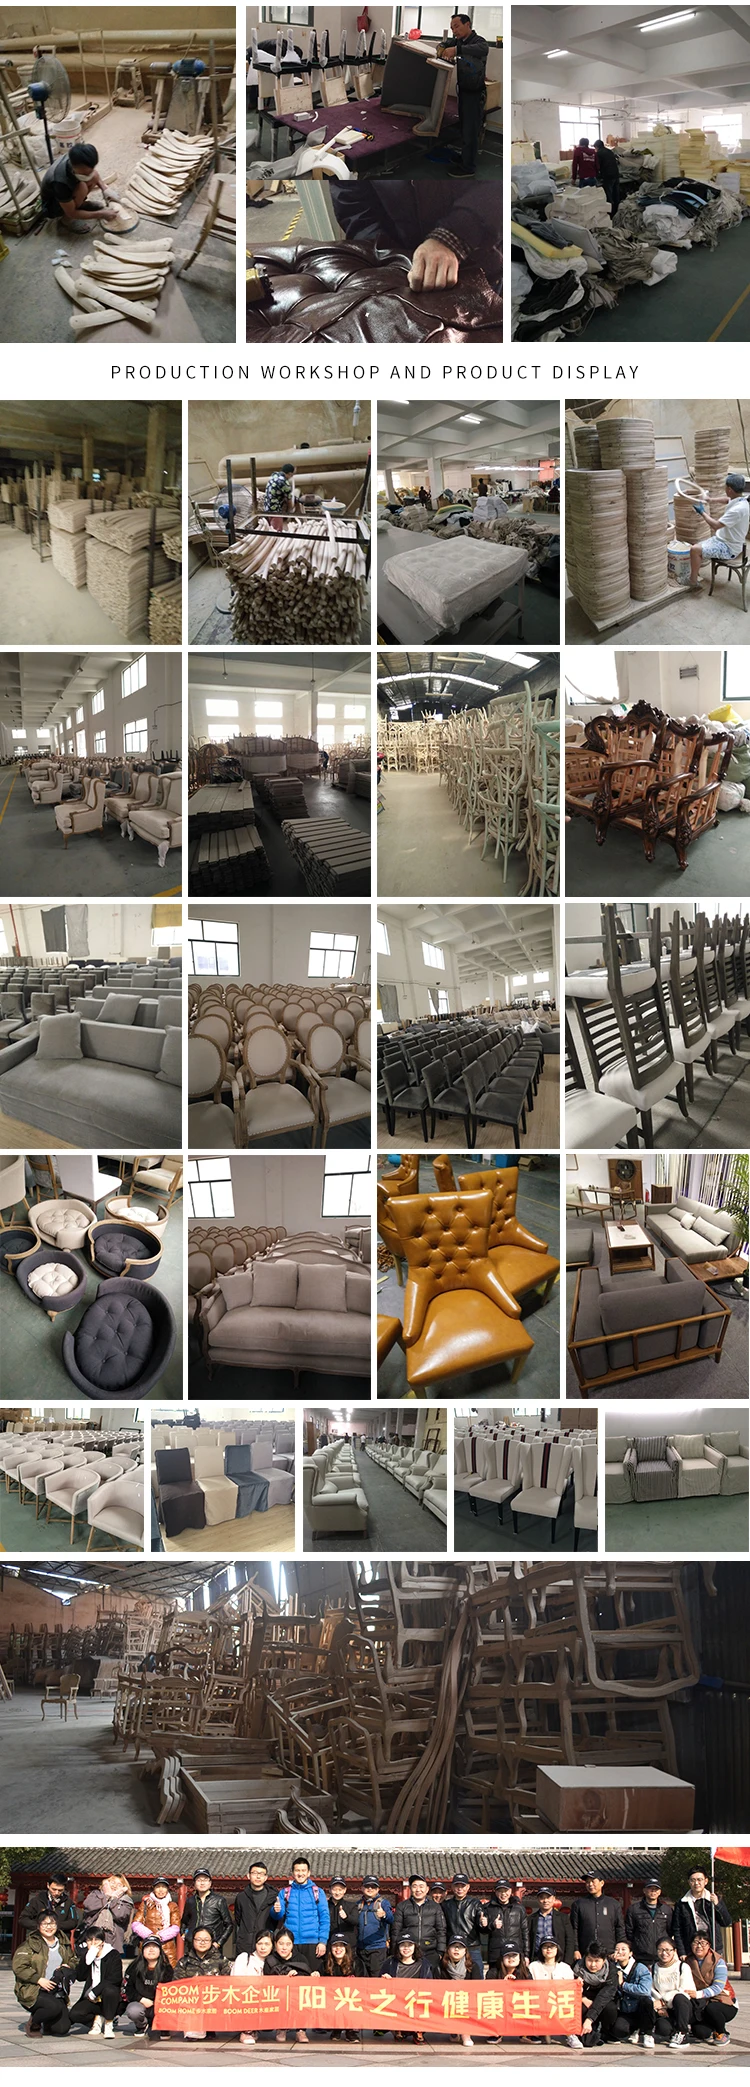 wholesale classic furniture chair luxury antique office chair